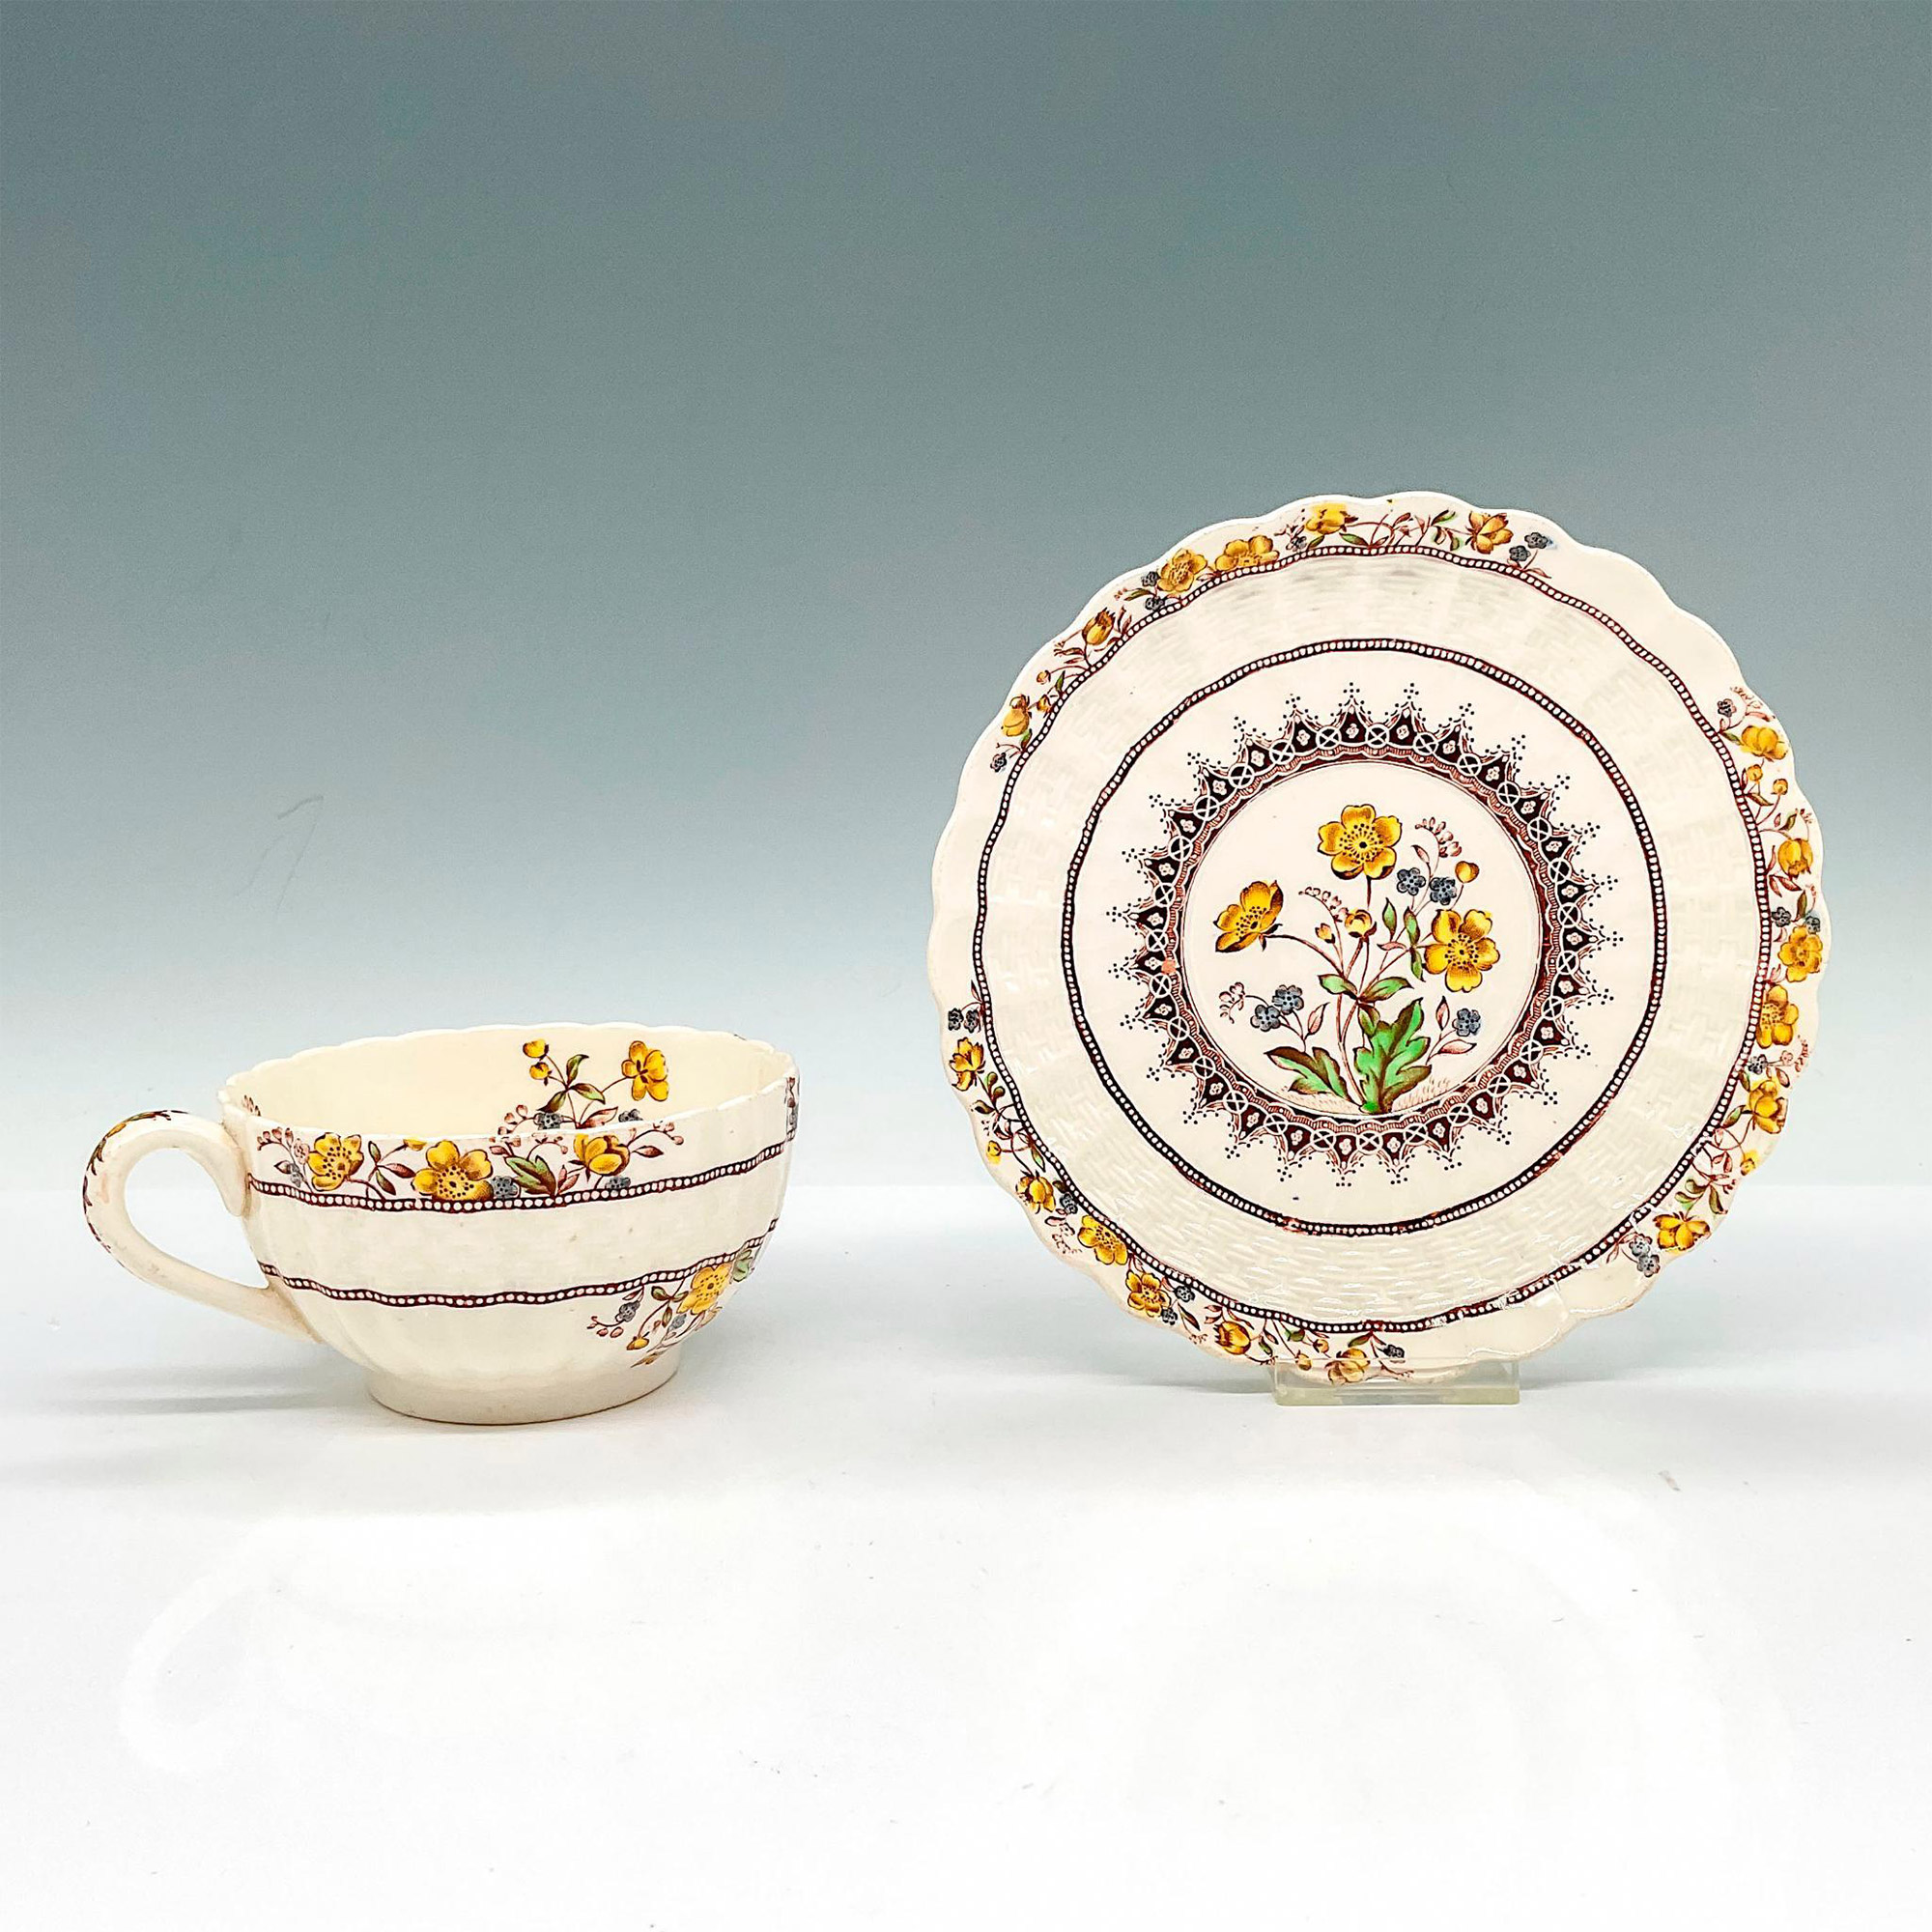 Copeland Spode Breakfast Cup and Saucer, Buttercup - Image 2 of 3